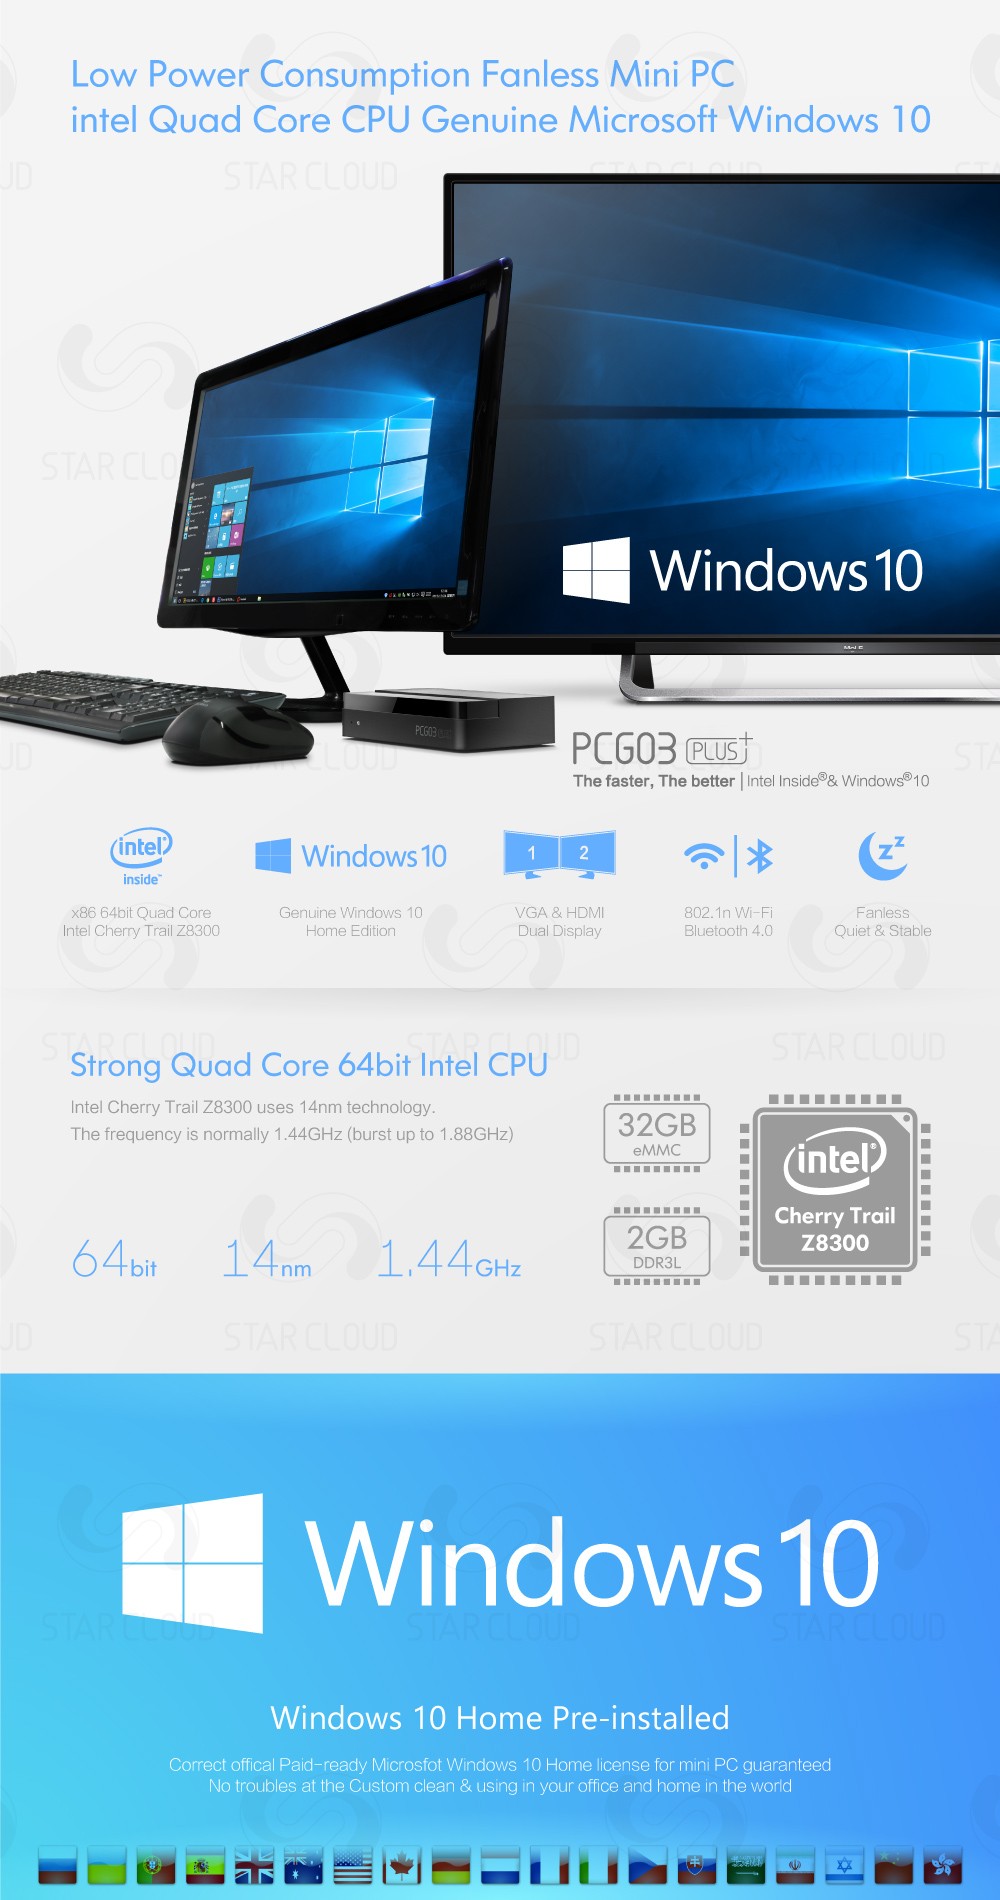 Low Power Consumption Fanless Mini PC intel Quad Core CPU Genuine Microsoft Windows 10 The faster, The better | Intel lnside®& Windows®10 Windows 10  Inside x86 64bit Quad Core	Genuine Windows 10	VGA&HDMI	802.1n Wi-Fi	Fanless Intel Cherry Trail Z8300	Home Edition	Dual Display	Bluetooth 4.0	Quiet & Stable Strong Quad Core 64bit Intel CPU Intel Cherry Trail Z8300 uses 14nm technology. The frequency is normally 1.44GHz (burst up to 1,88GHz) 32GB eMMC	2GB DDR3L 64bit 14nm 1.44GHZ